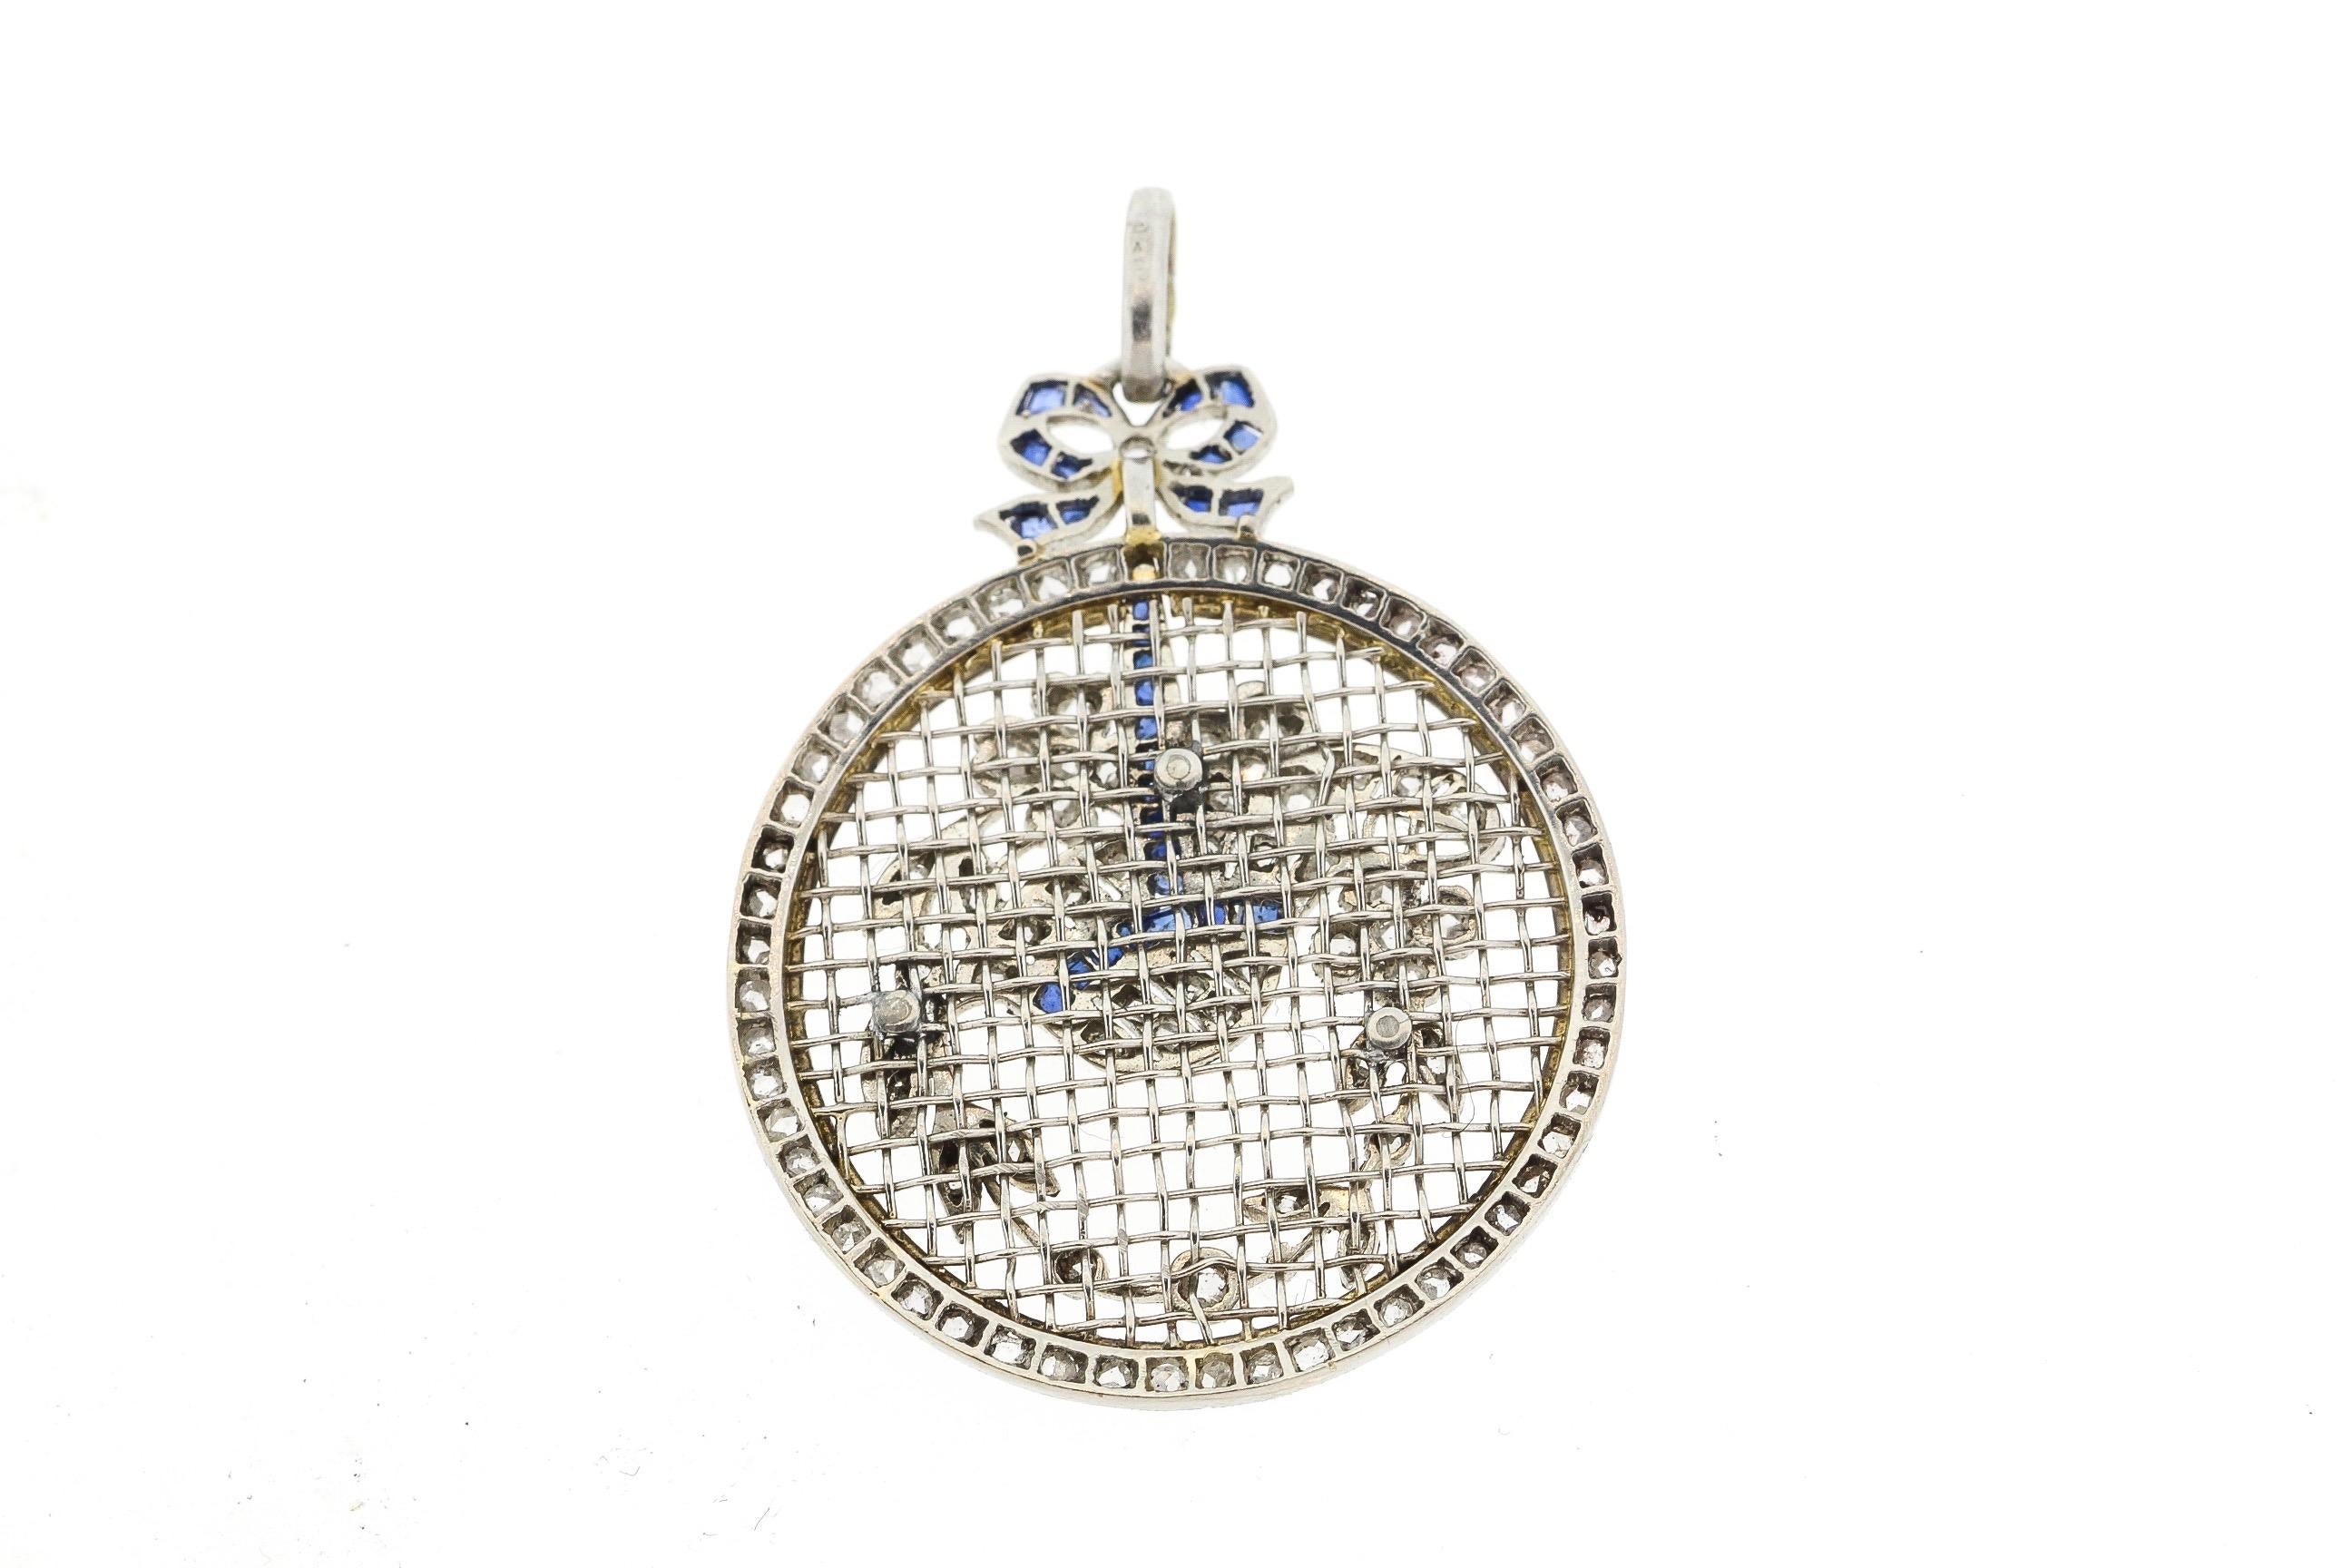 An antique rosecut diamond sapphire floral pendant exquisitely made by hand with platinum to resemble a framed needle point. This pendant is an excellent example of Edwardian aesthetic, which following the trend of the machinist jewelry of the end